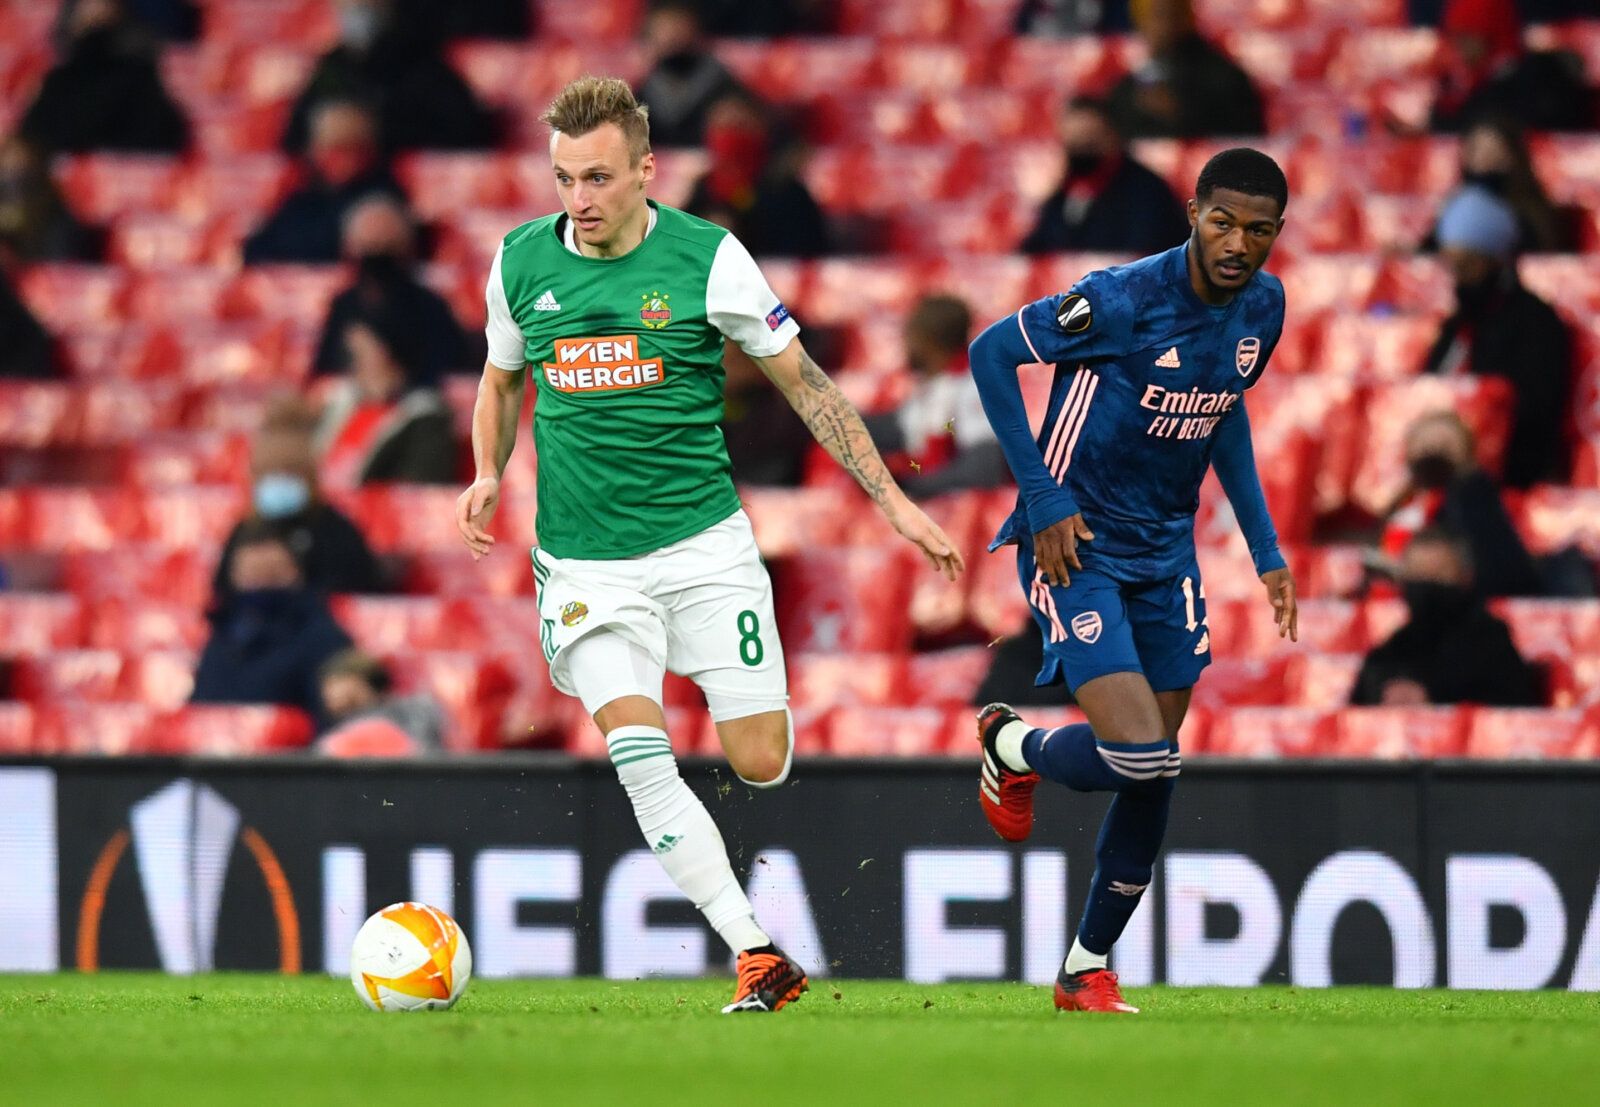 Soccer Football - Europa League - Group B - Arsenal v SK Rapid Wien - Emirates Stadium, London, Britain - December 3, 2020 SK Rapid Wien's Marcel Ritzmaier in action with Arsenal's Ainsley Maitland-Niles REUTERS/Dylan Martinez